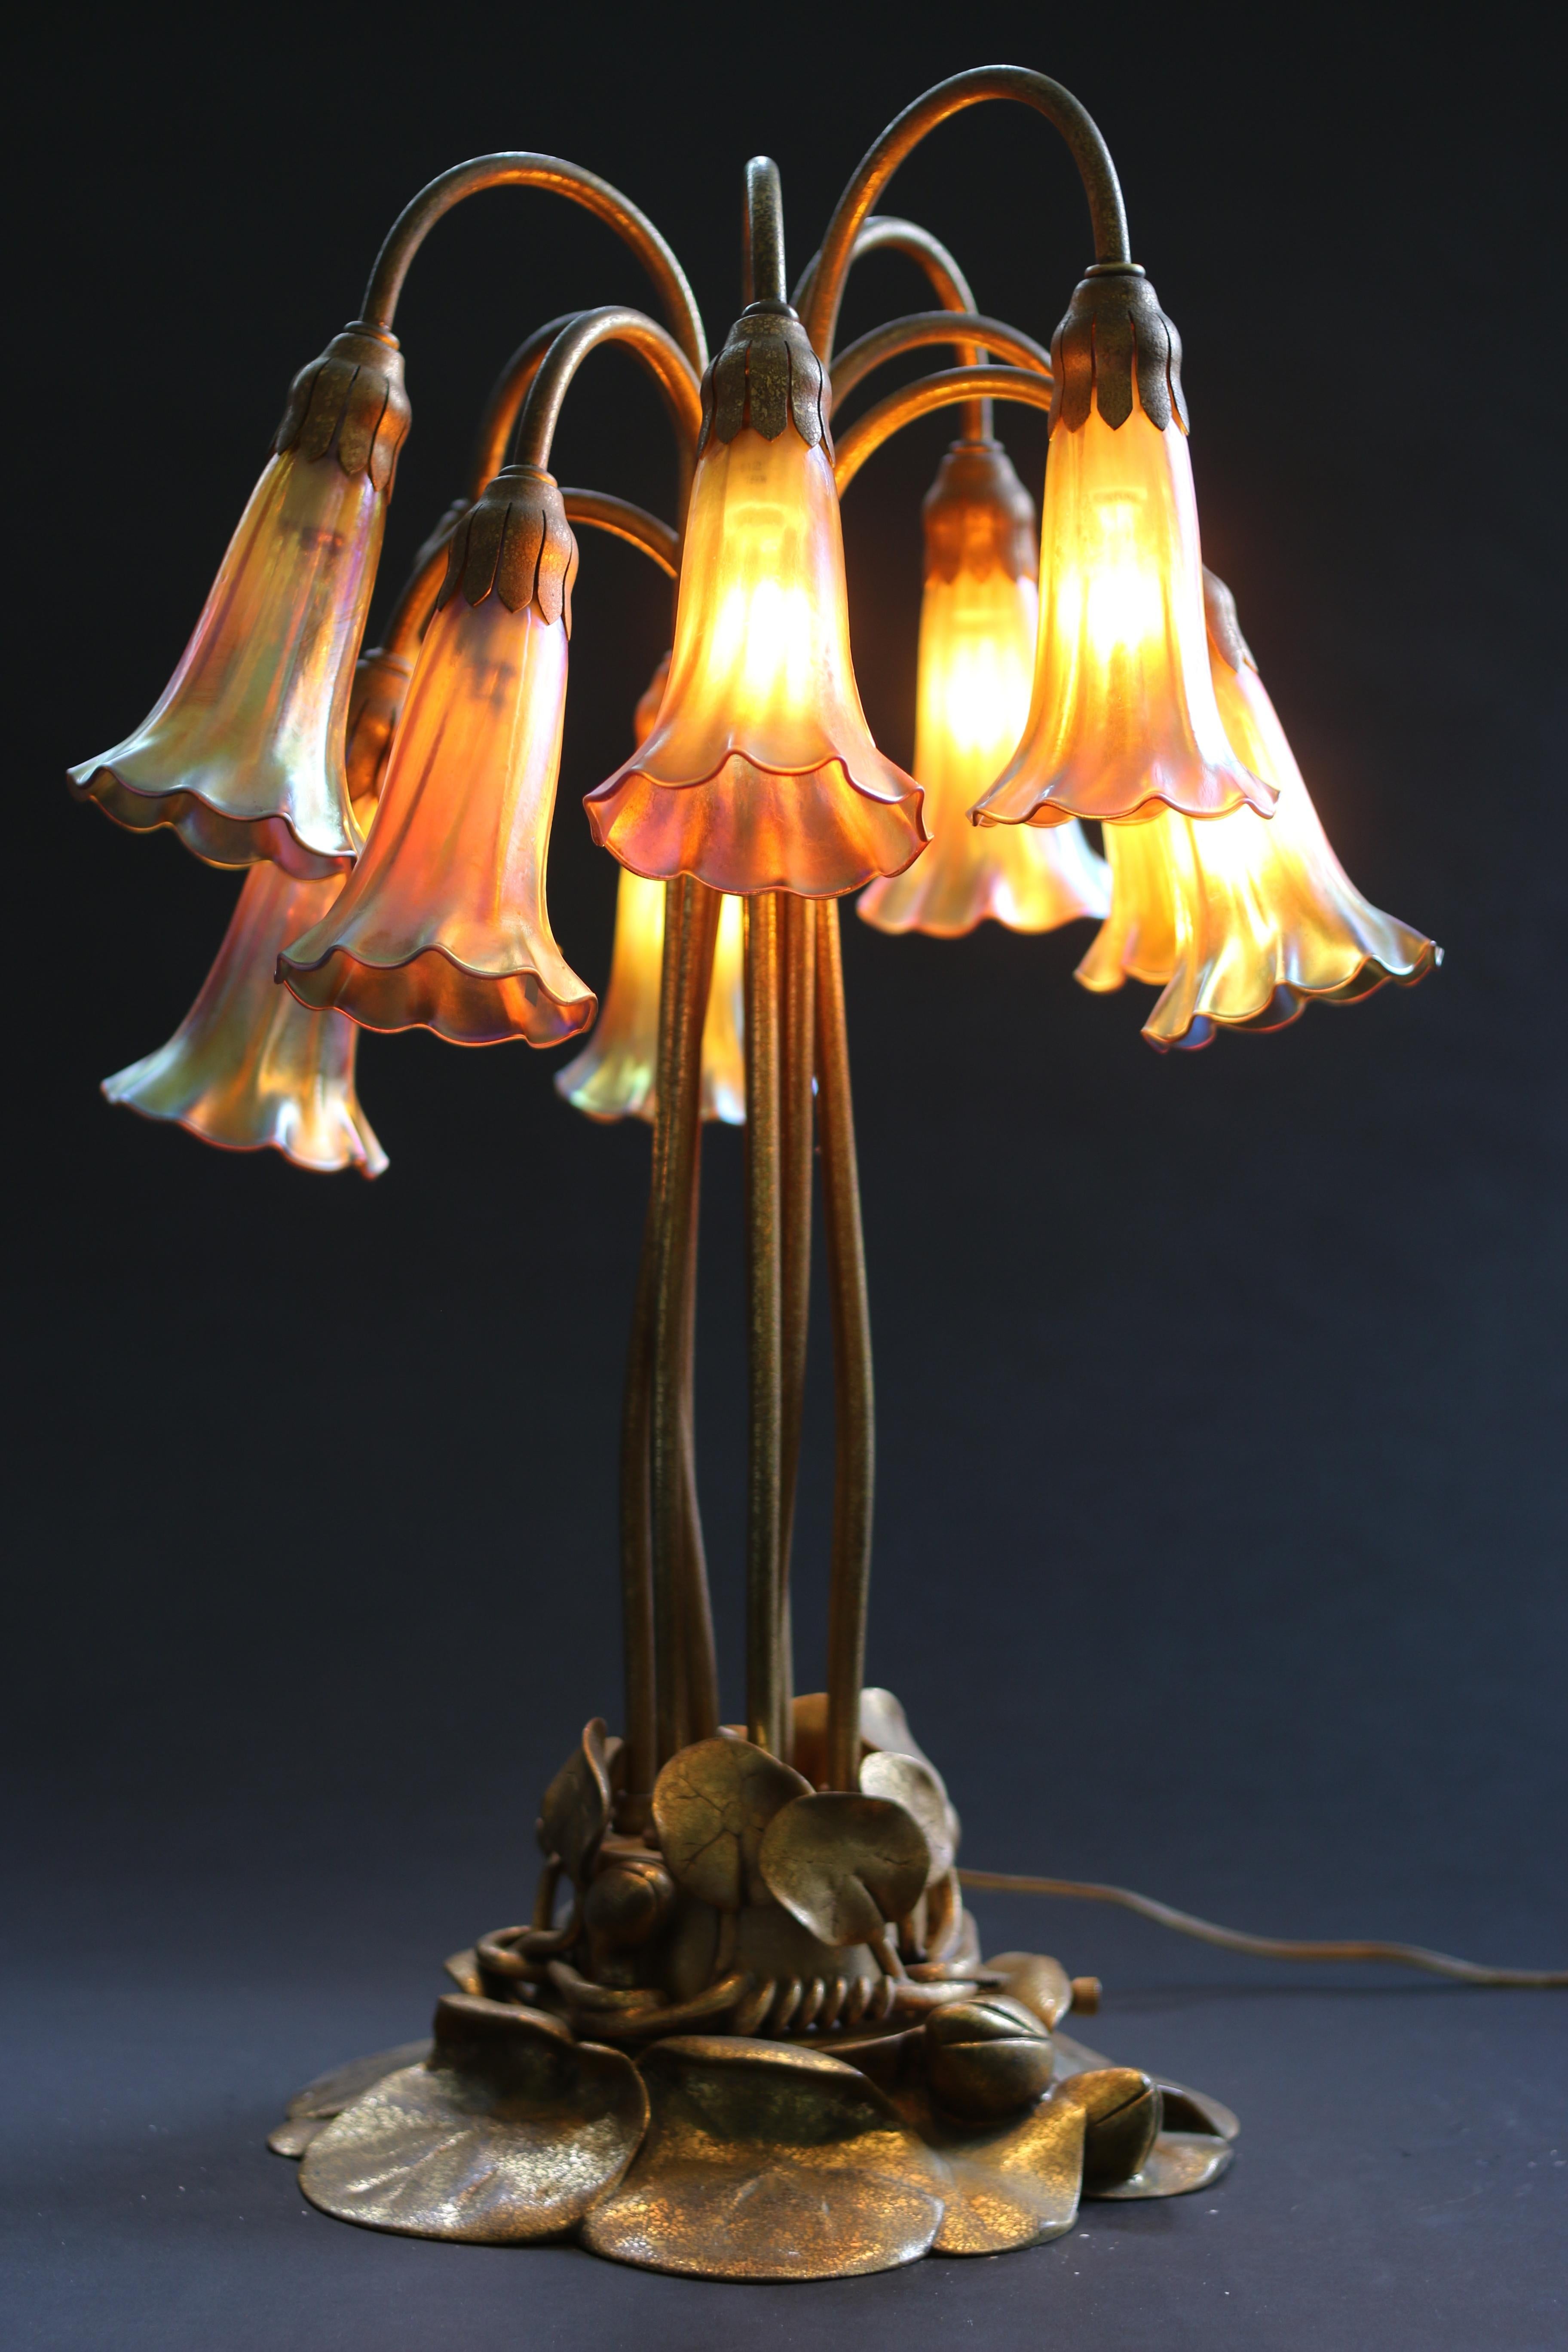 Here is a Tiffany Studios gold 10-light lily lamp with the a lily pad base and elegant stems that terminate in 10 authentic Tiffany favrile iridescent lily shades. The shades are well matched in both color and shape. The base is in excellent shape